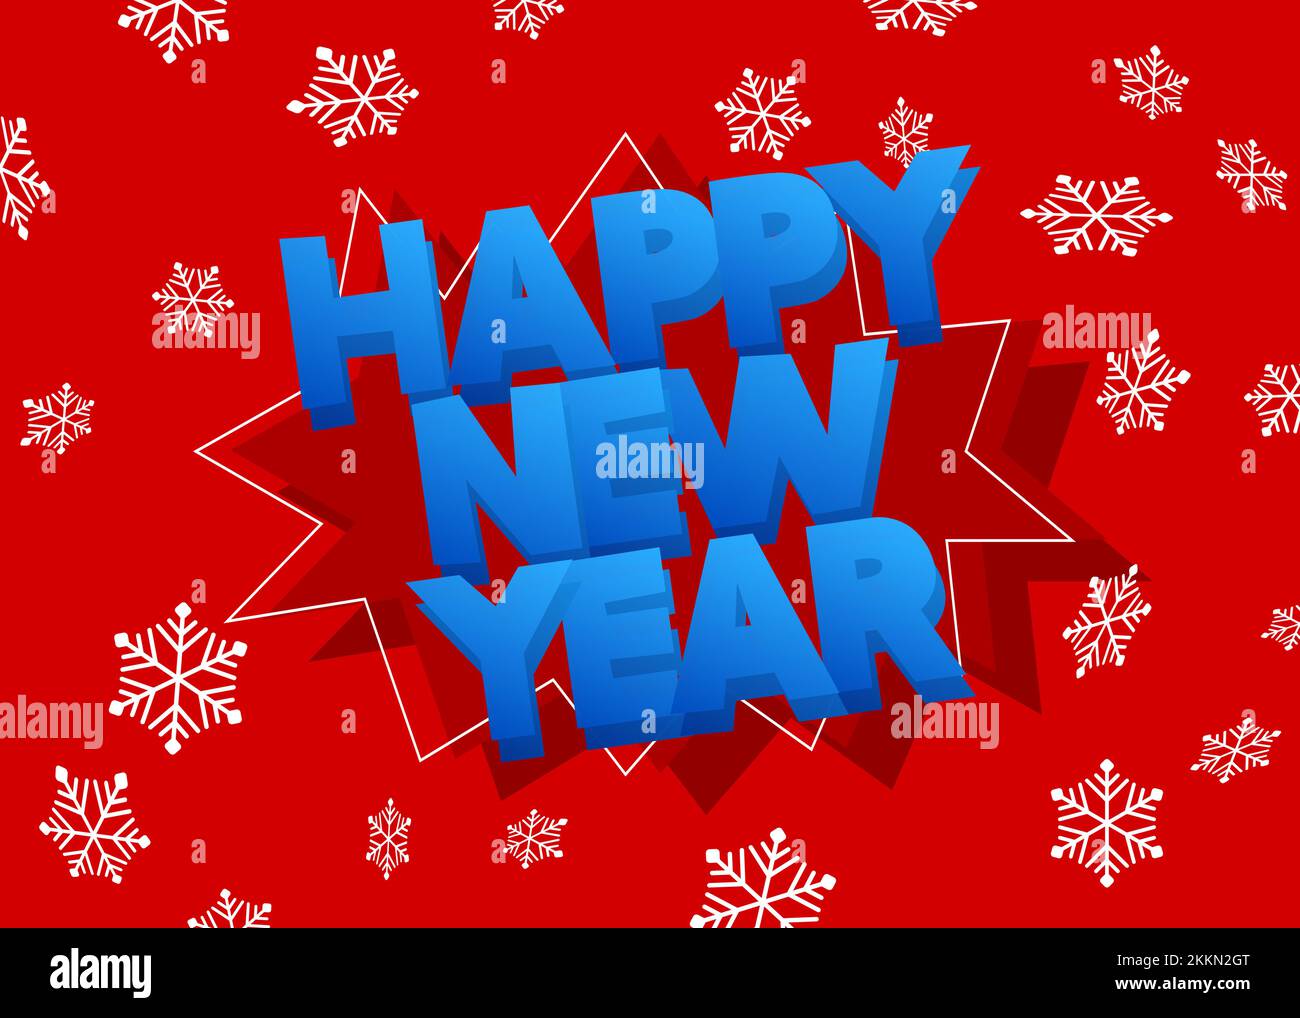 Snowflake background with Happy New Year text. Holiday event poster, Winter, Snow, Christmas banner. Stock Vector